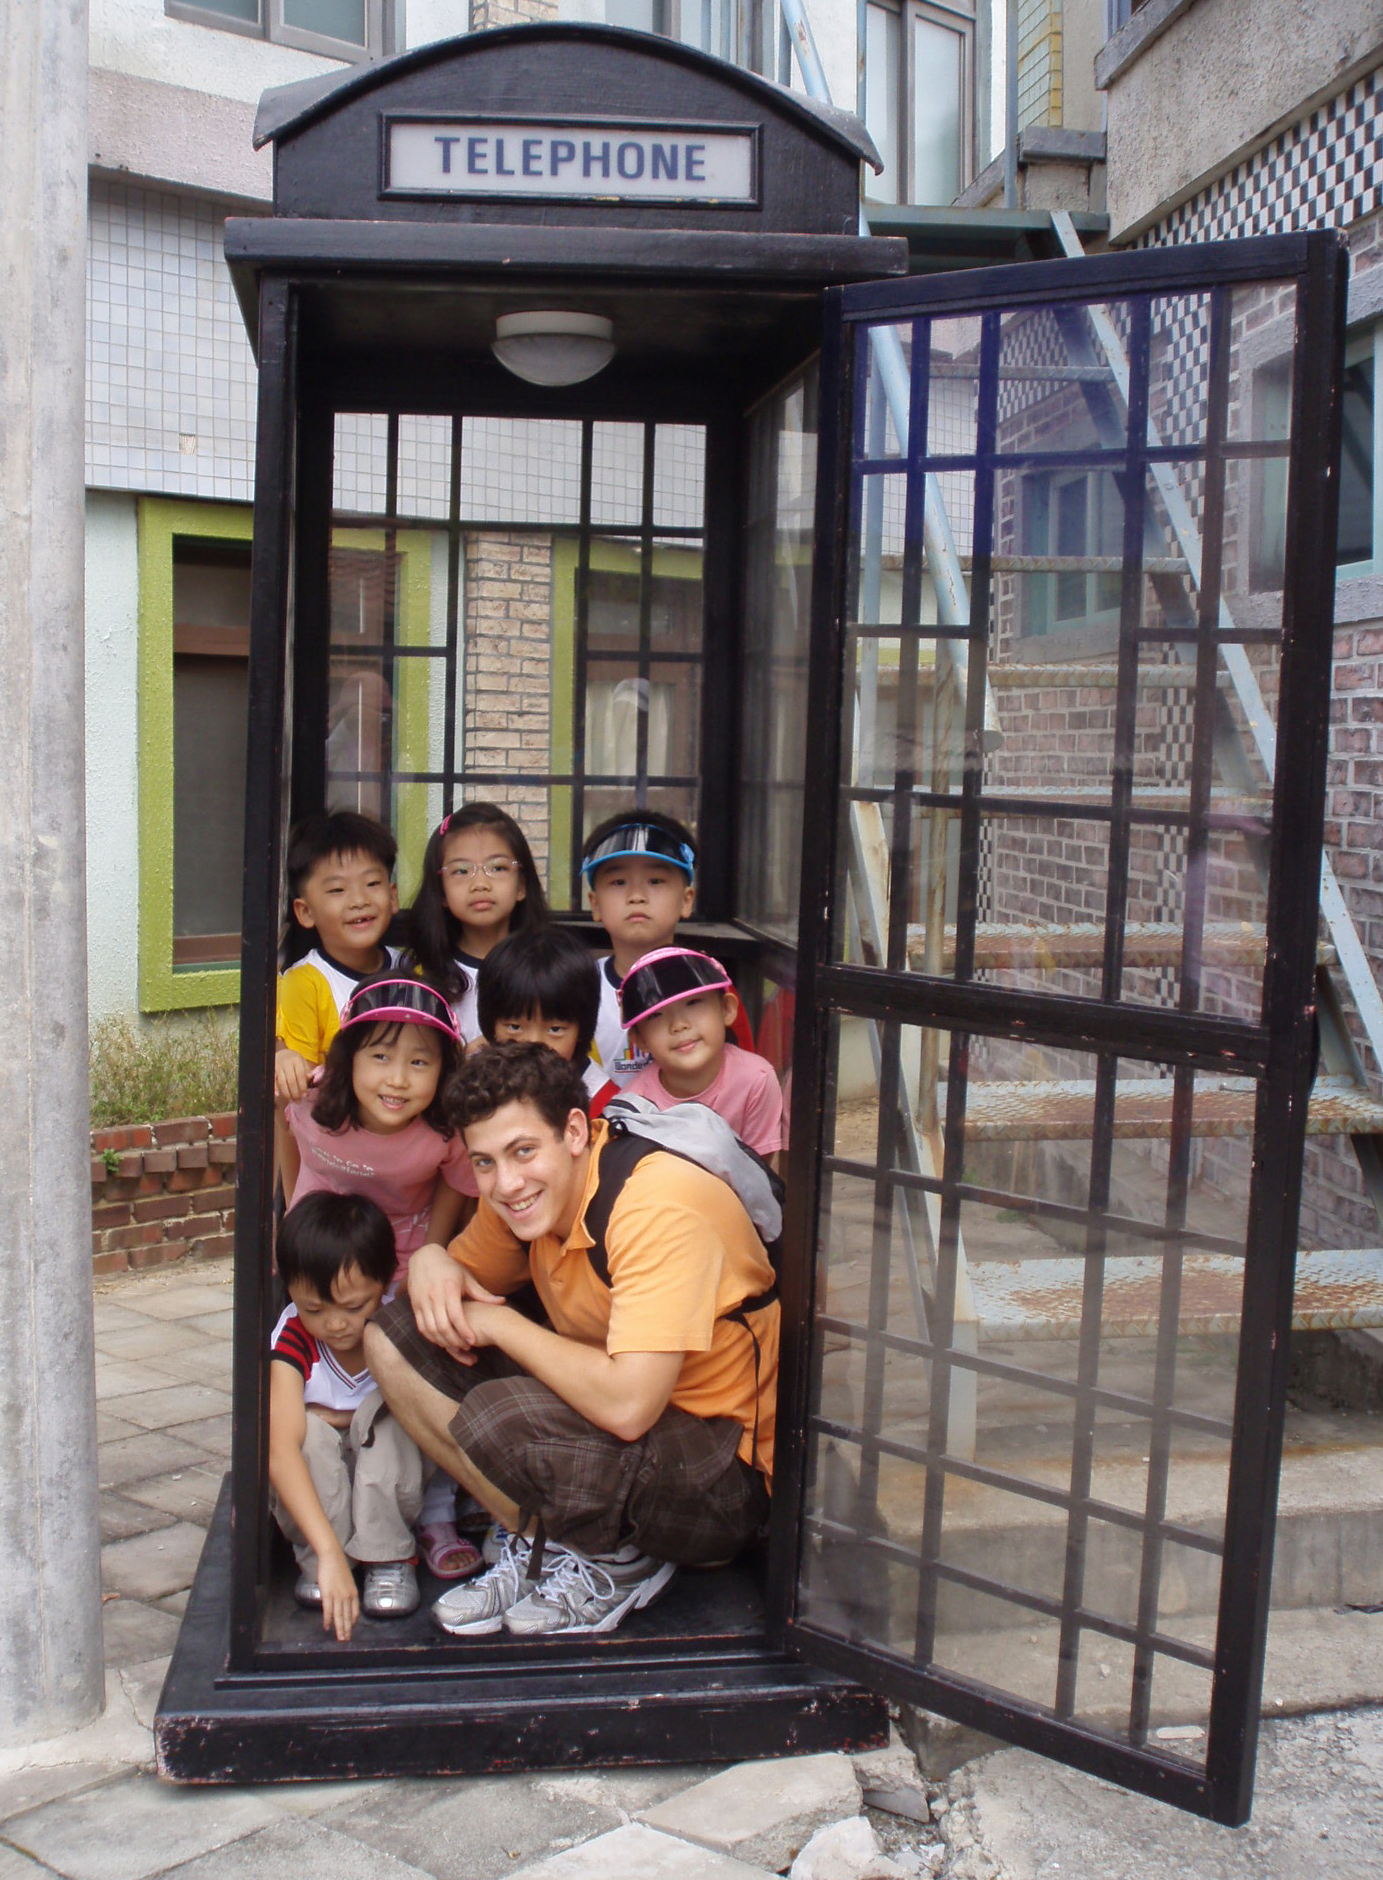 adam in a phonebooth with his students